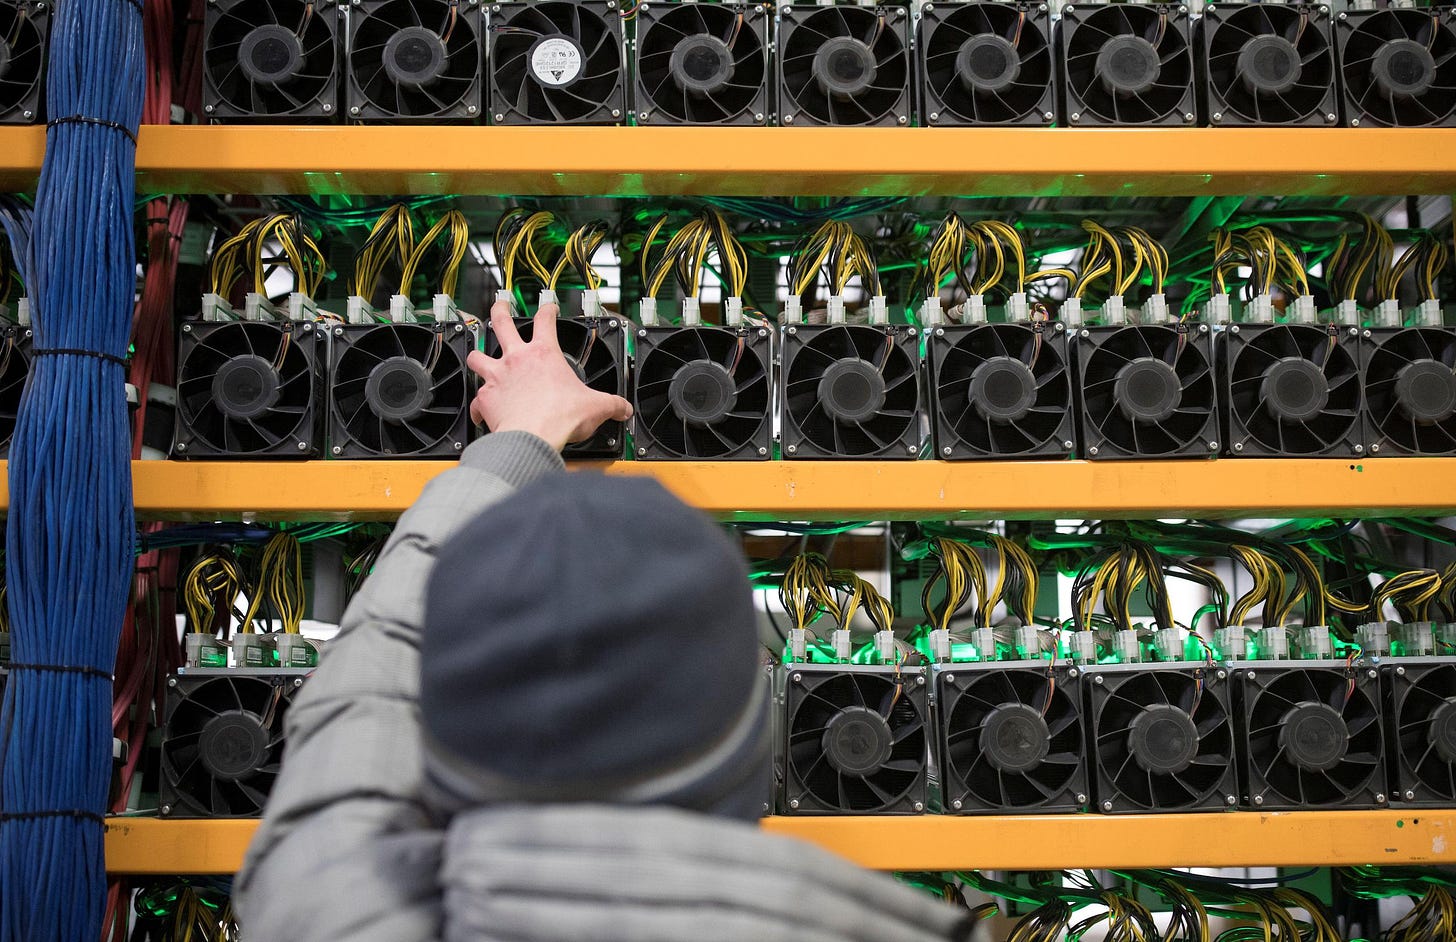 Great mining migration': Power-hungry Bitcoin leaves China